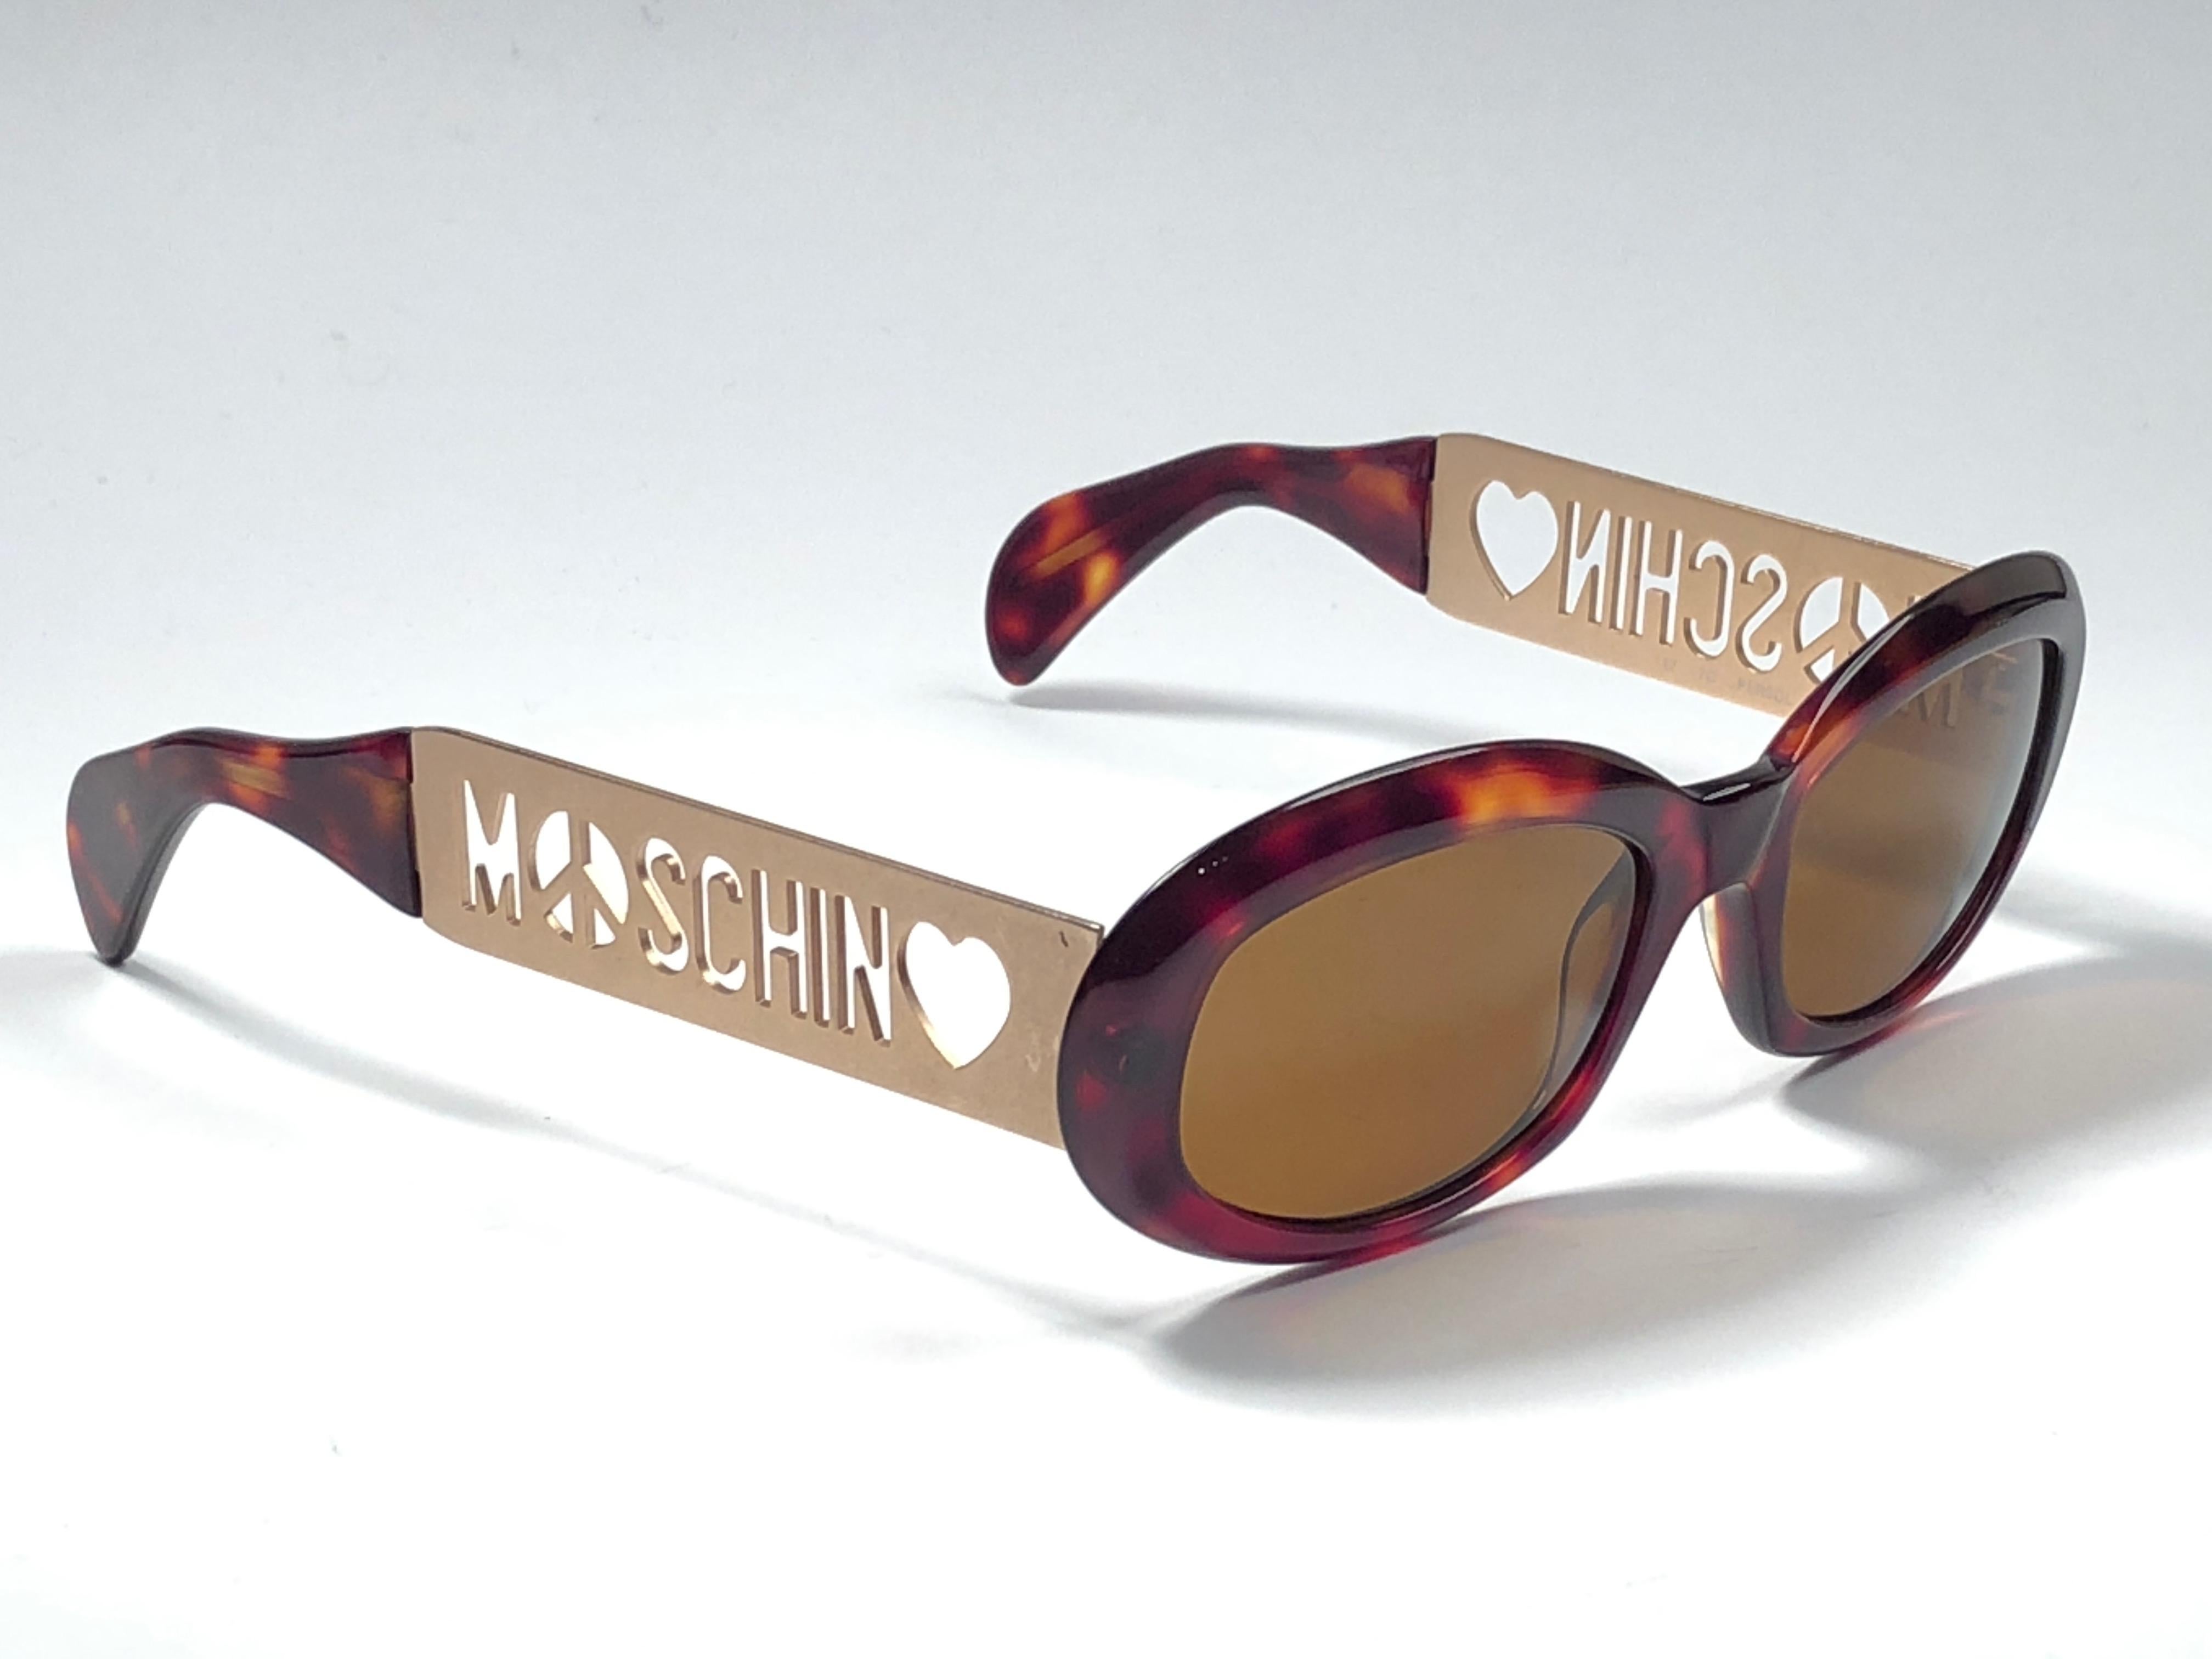 New Vintage Moschino small oval tortoise & gold frame with brown lenses.

Made in Italy.
 
Produced and design in 1990's.

New, never worn or displayed.
